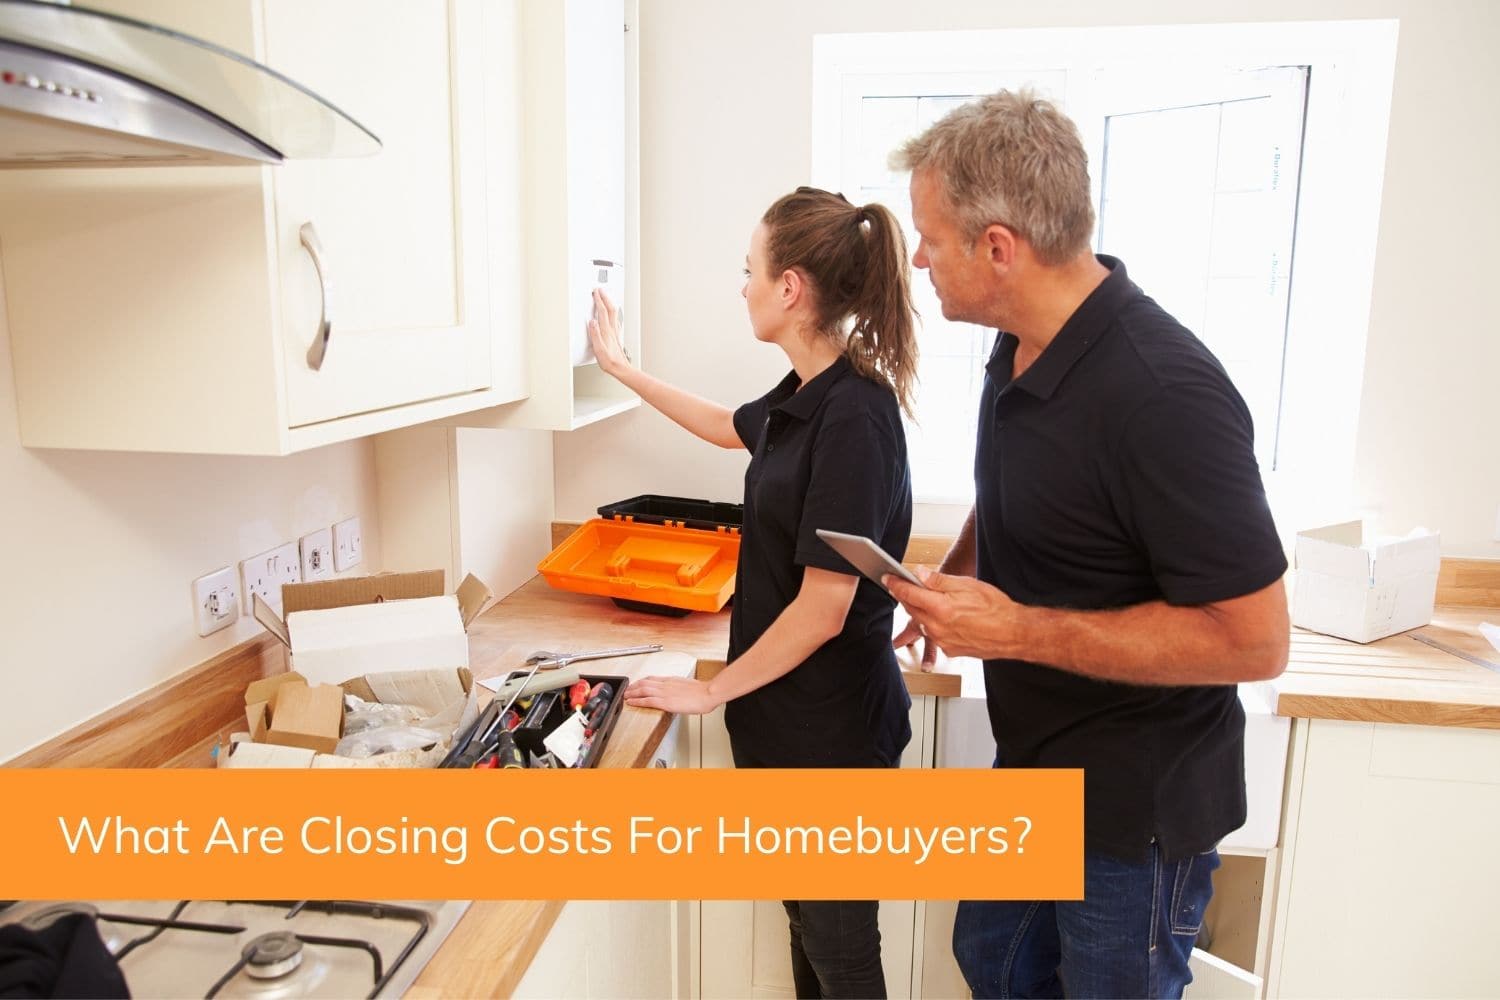 A young homebuyer and home inspector look at the kitchen and asses additional repair costs that will need to be added to the total closing costs.